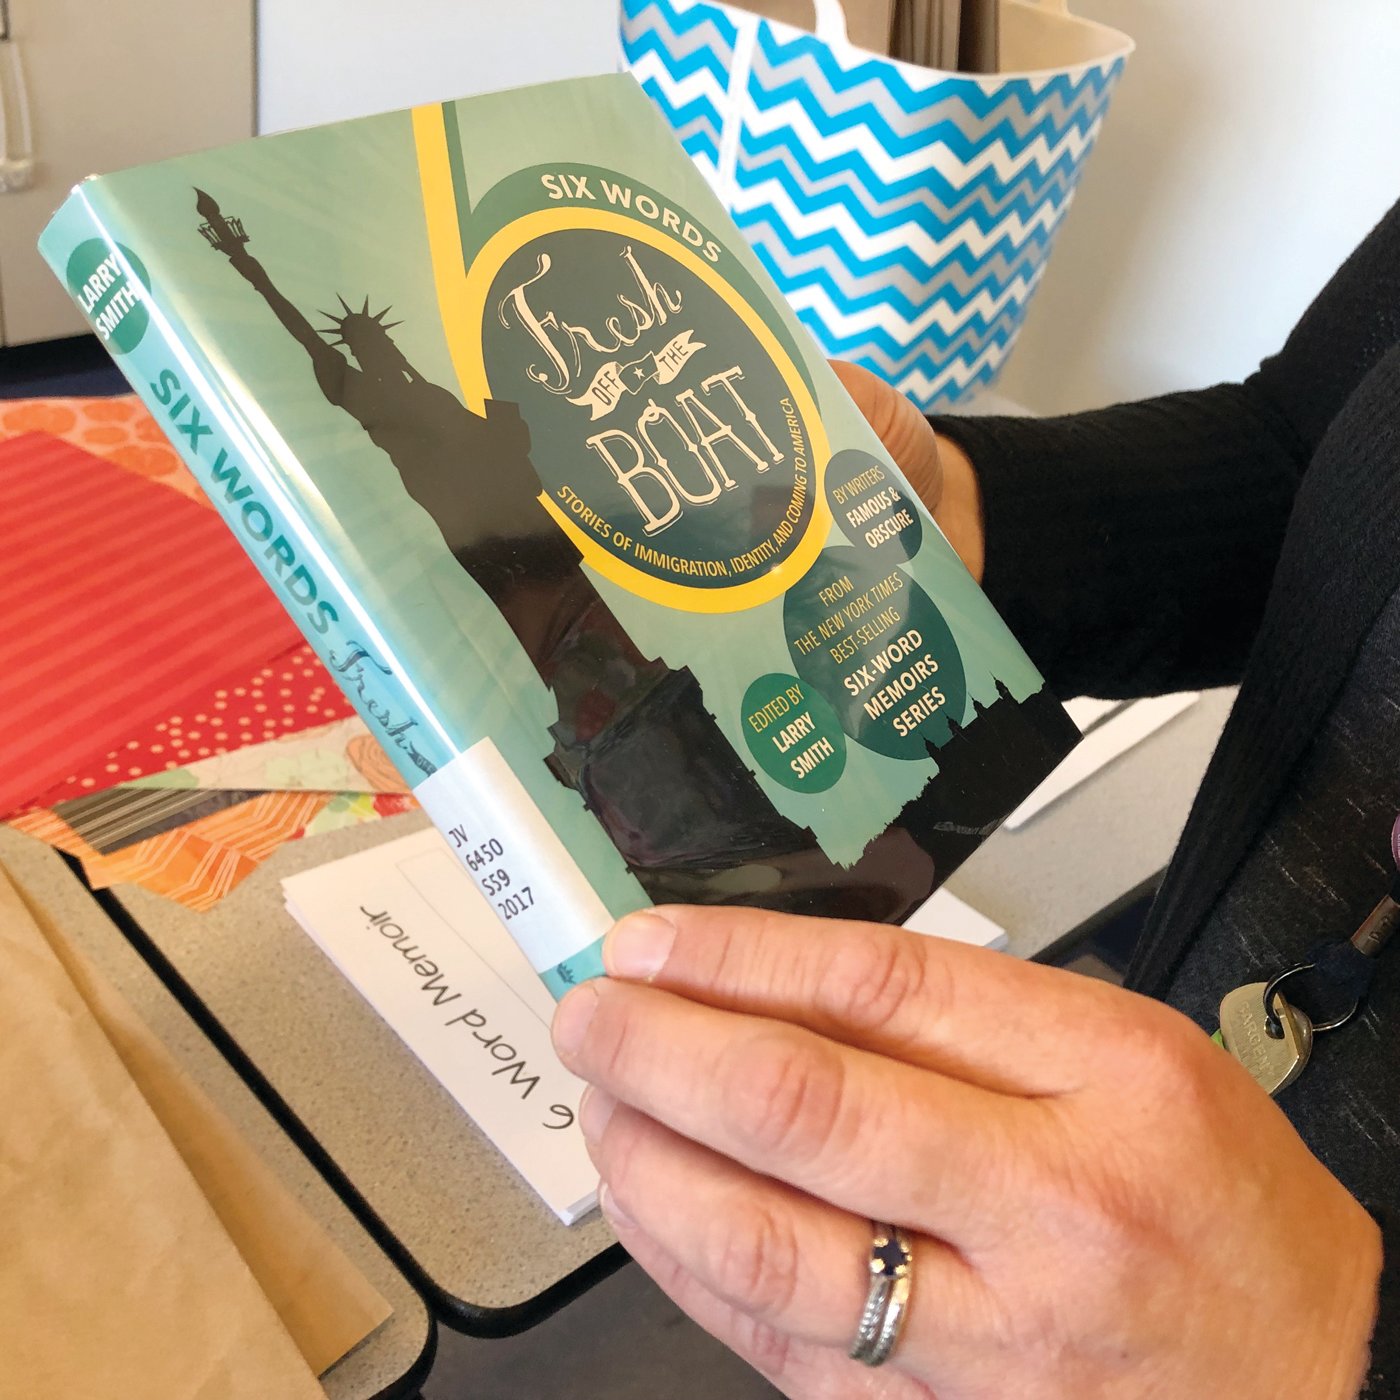 The inspiration for the Welcoming Library tie-in project, Six Word Memoirs, is the book, Fresh Off the Boat: Stories of Immigration, Identity, and Coming to America, edited by Larry Smith.